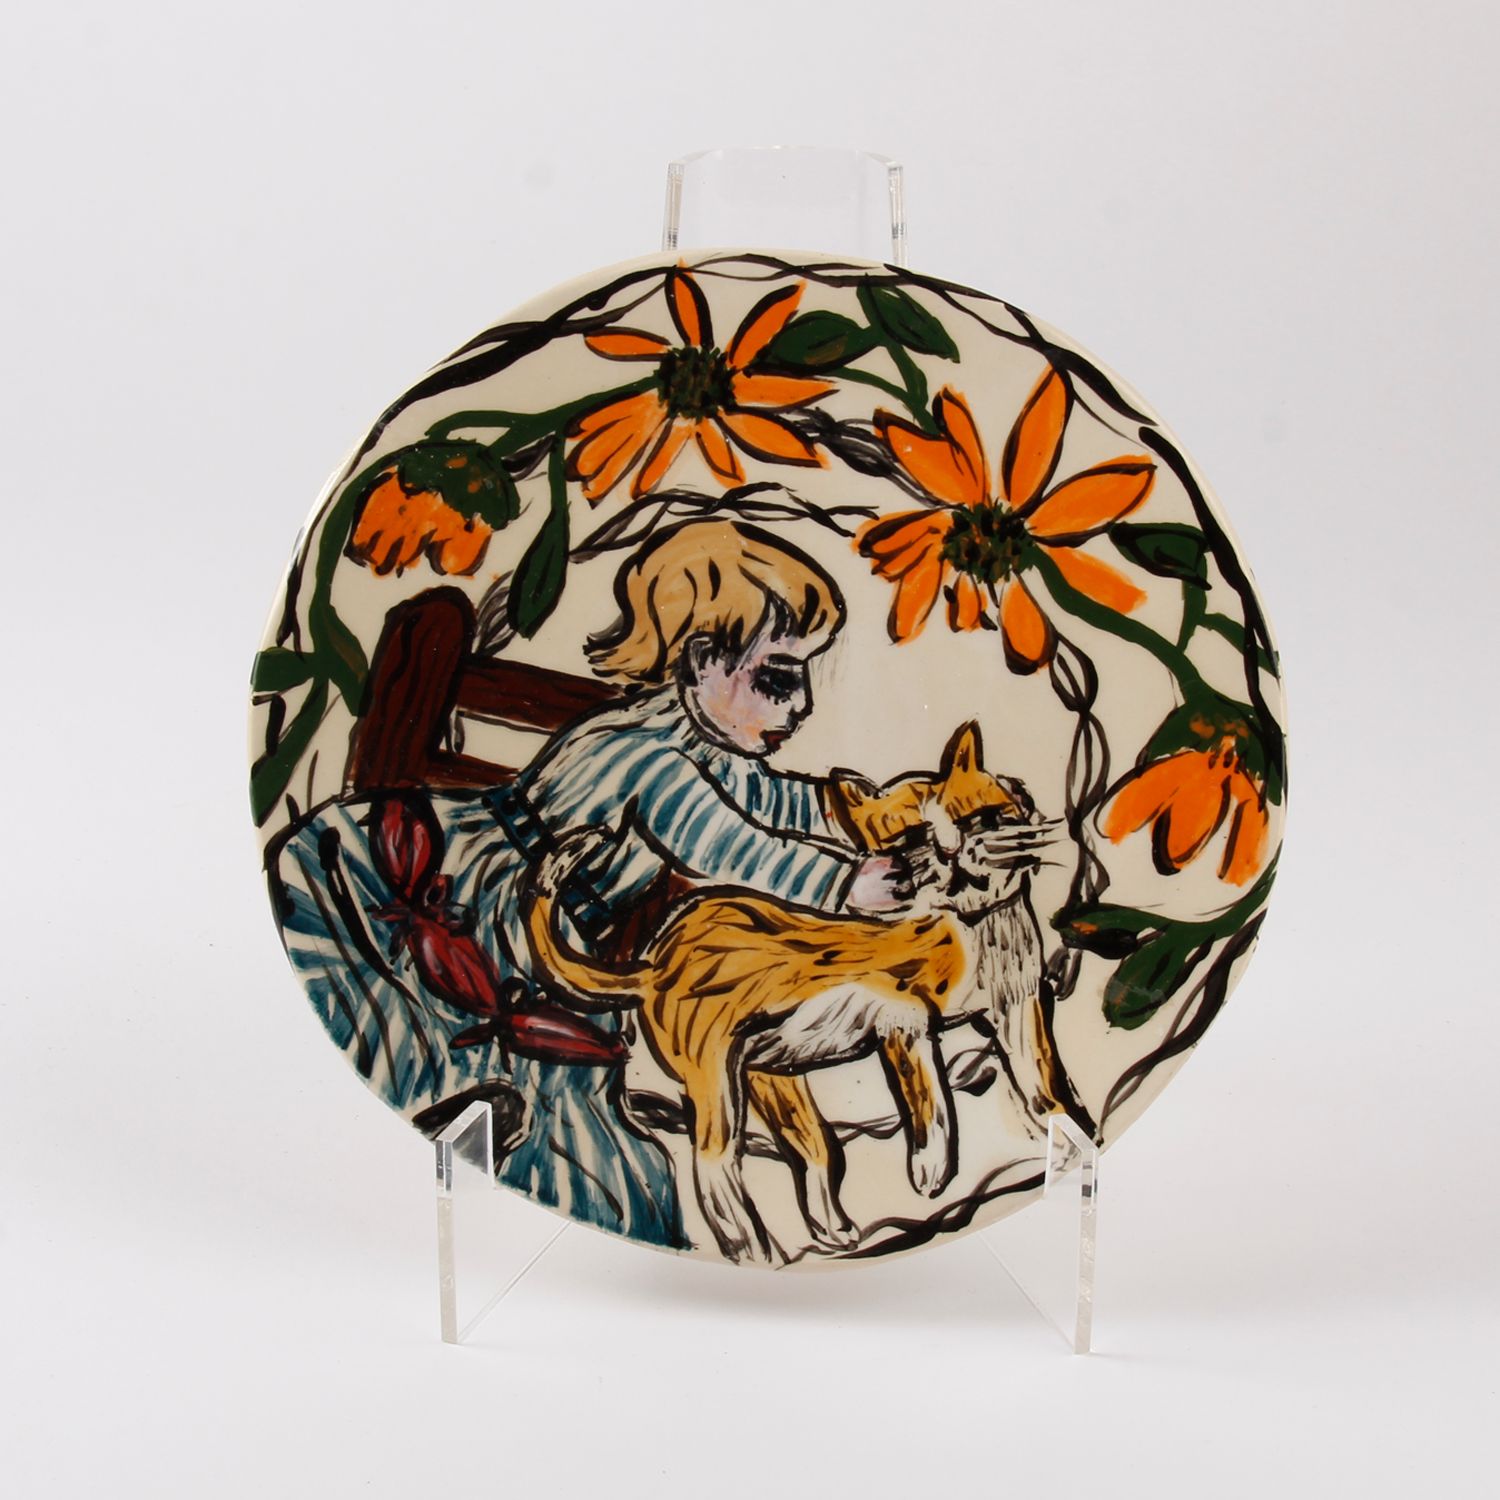 Patricia Lazar: Small Plate with Girl and Cat Product Image 1 of 3